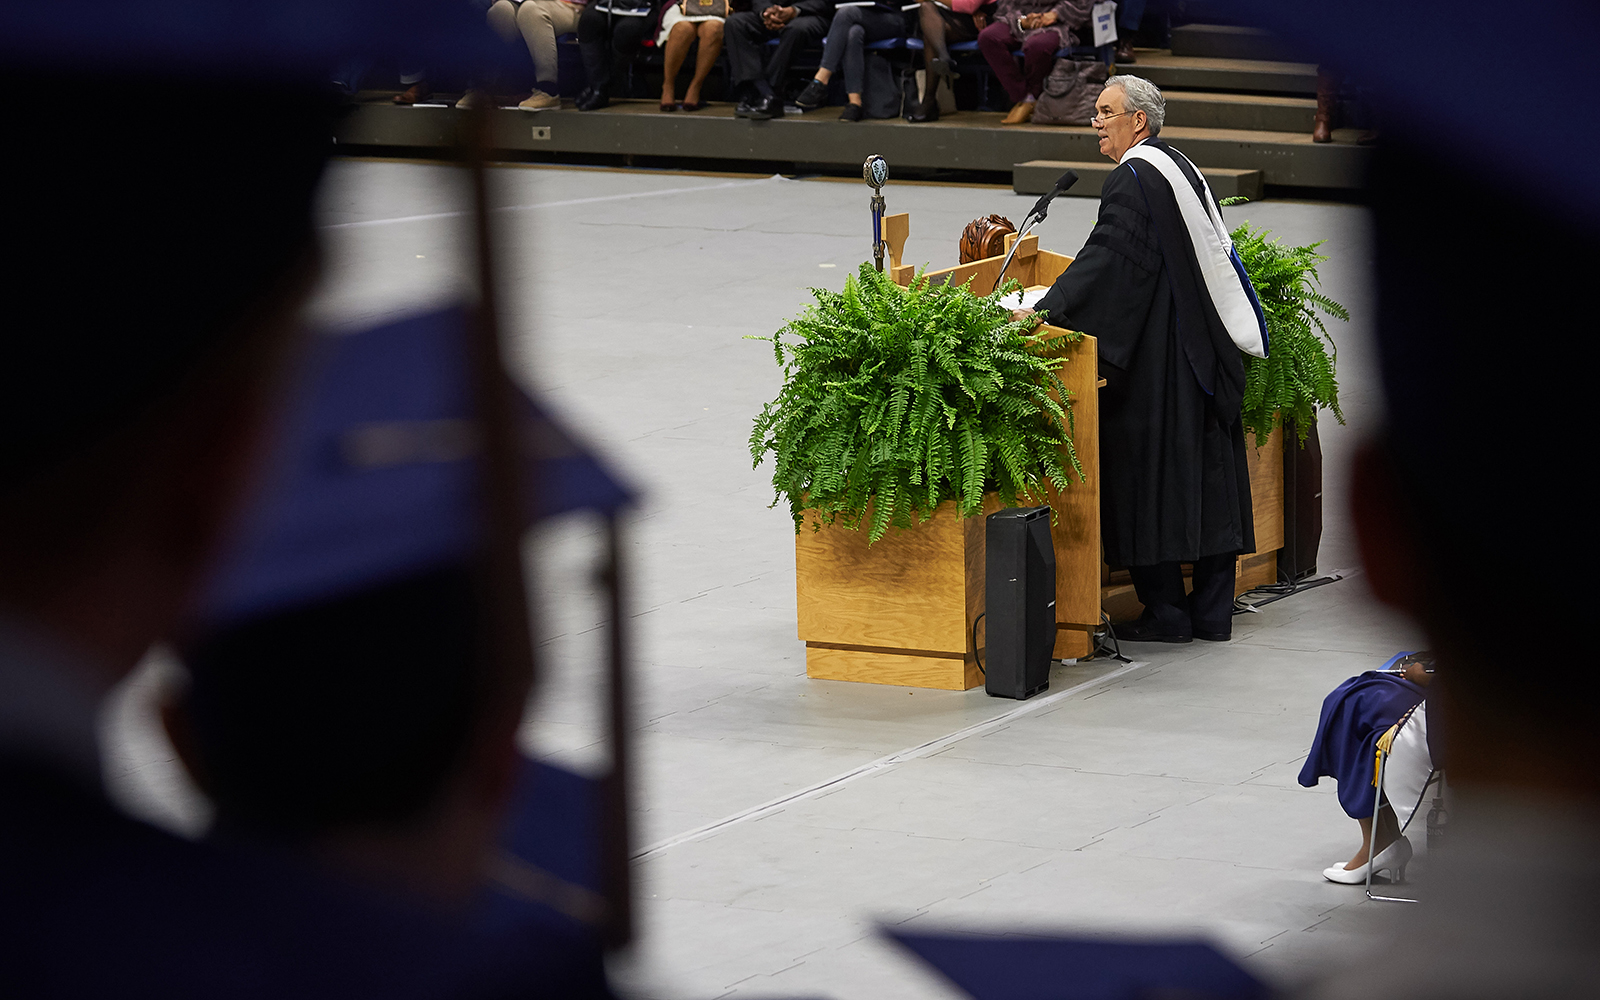 Douglas Elliot '82 (BUS) gives the address during the School of Business Commencement ceremony at Gampel Pavilion on May 7, 2017. (Peter Morenus/UConn Photo)